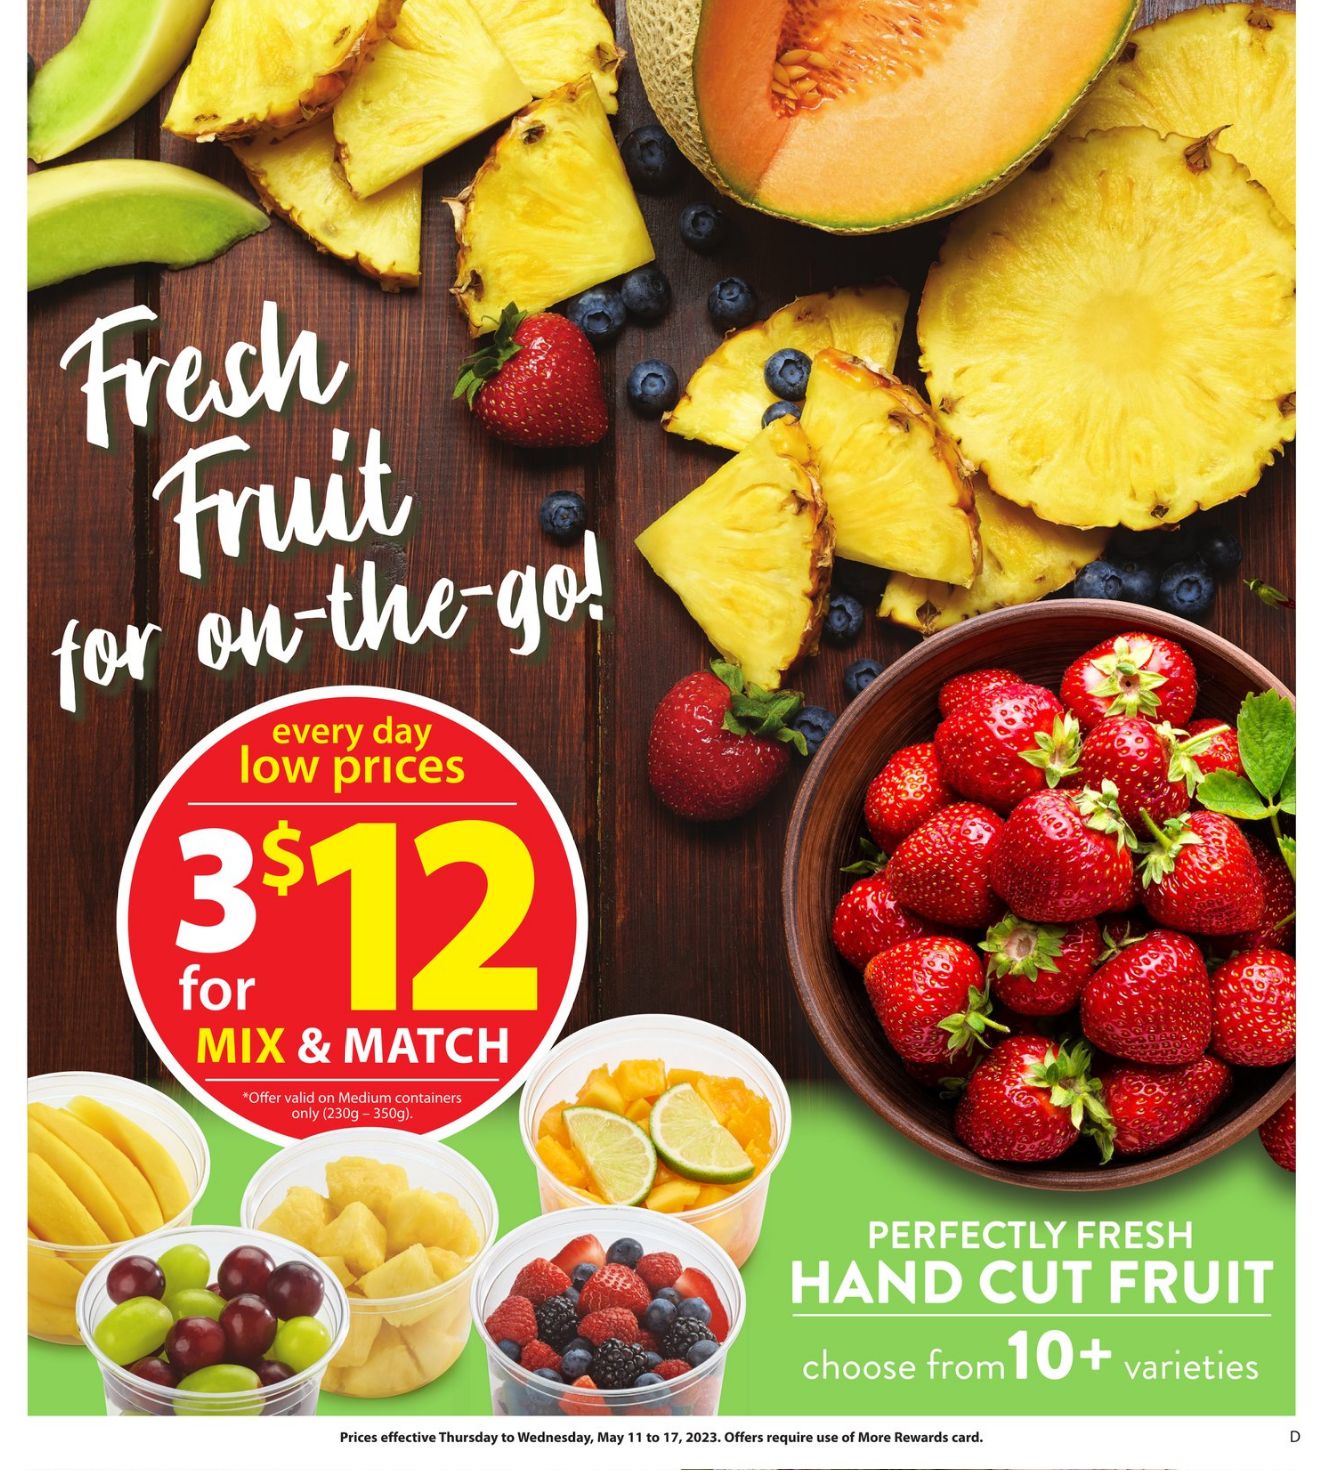 Flyer Save-On-Foods 11.05.2023 - 17.05.2023